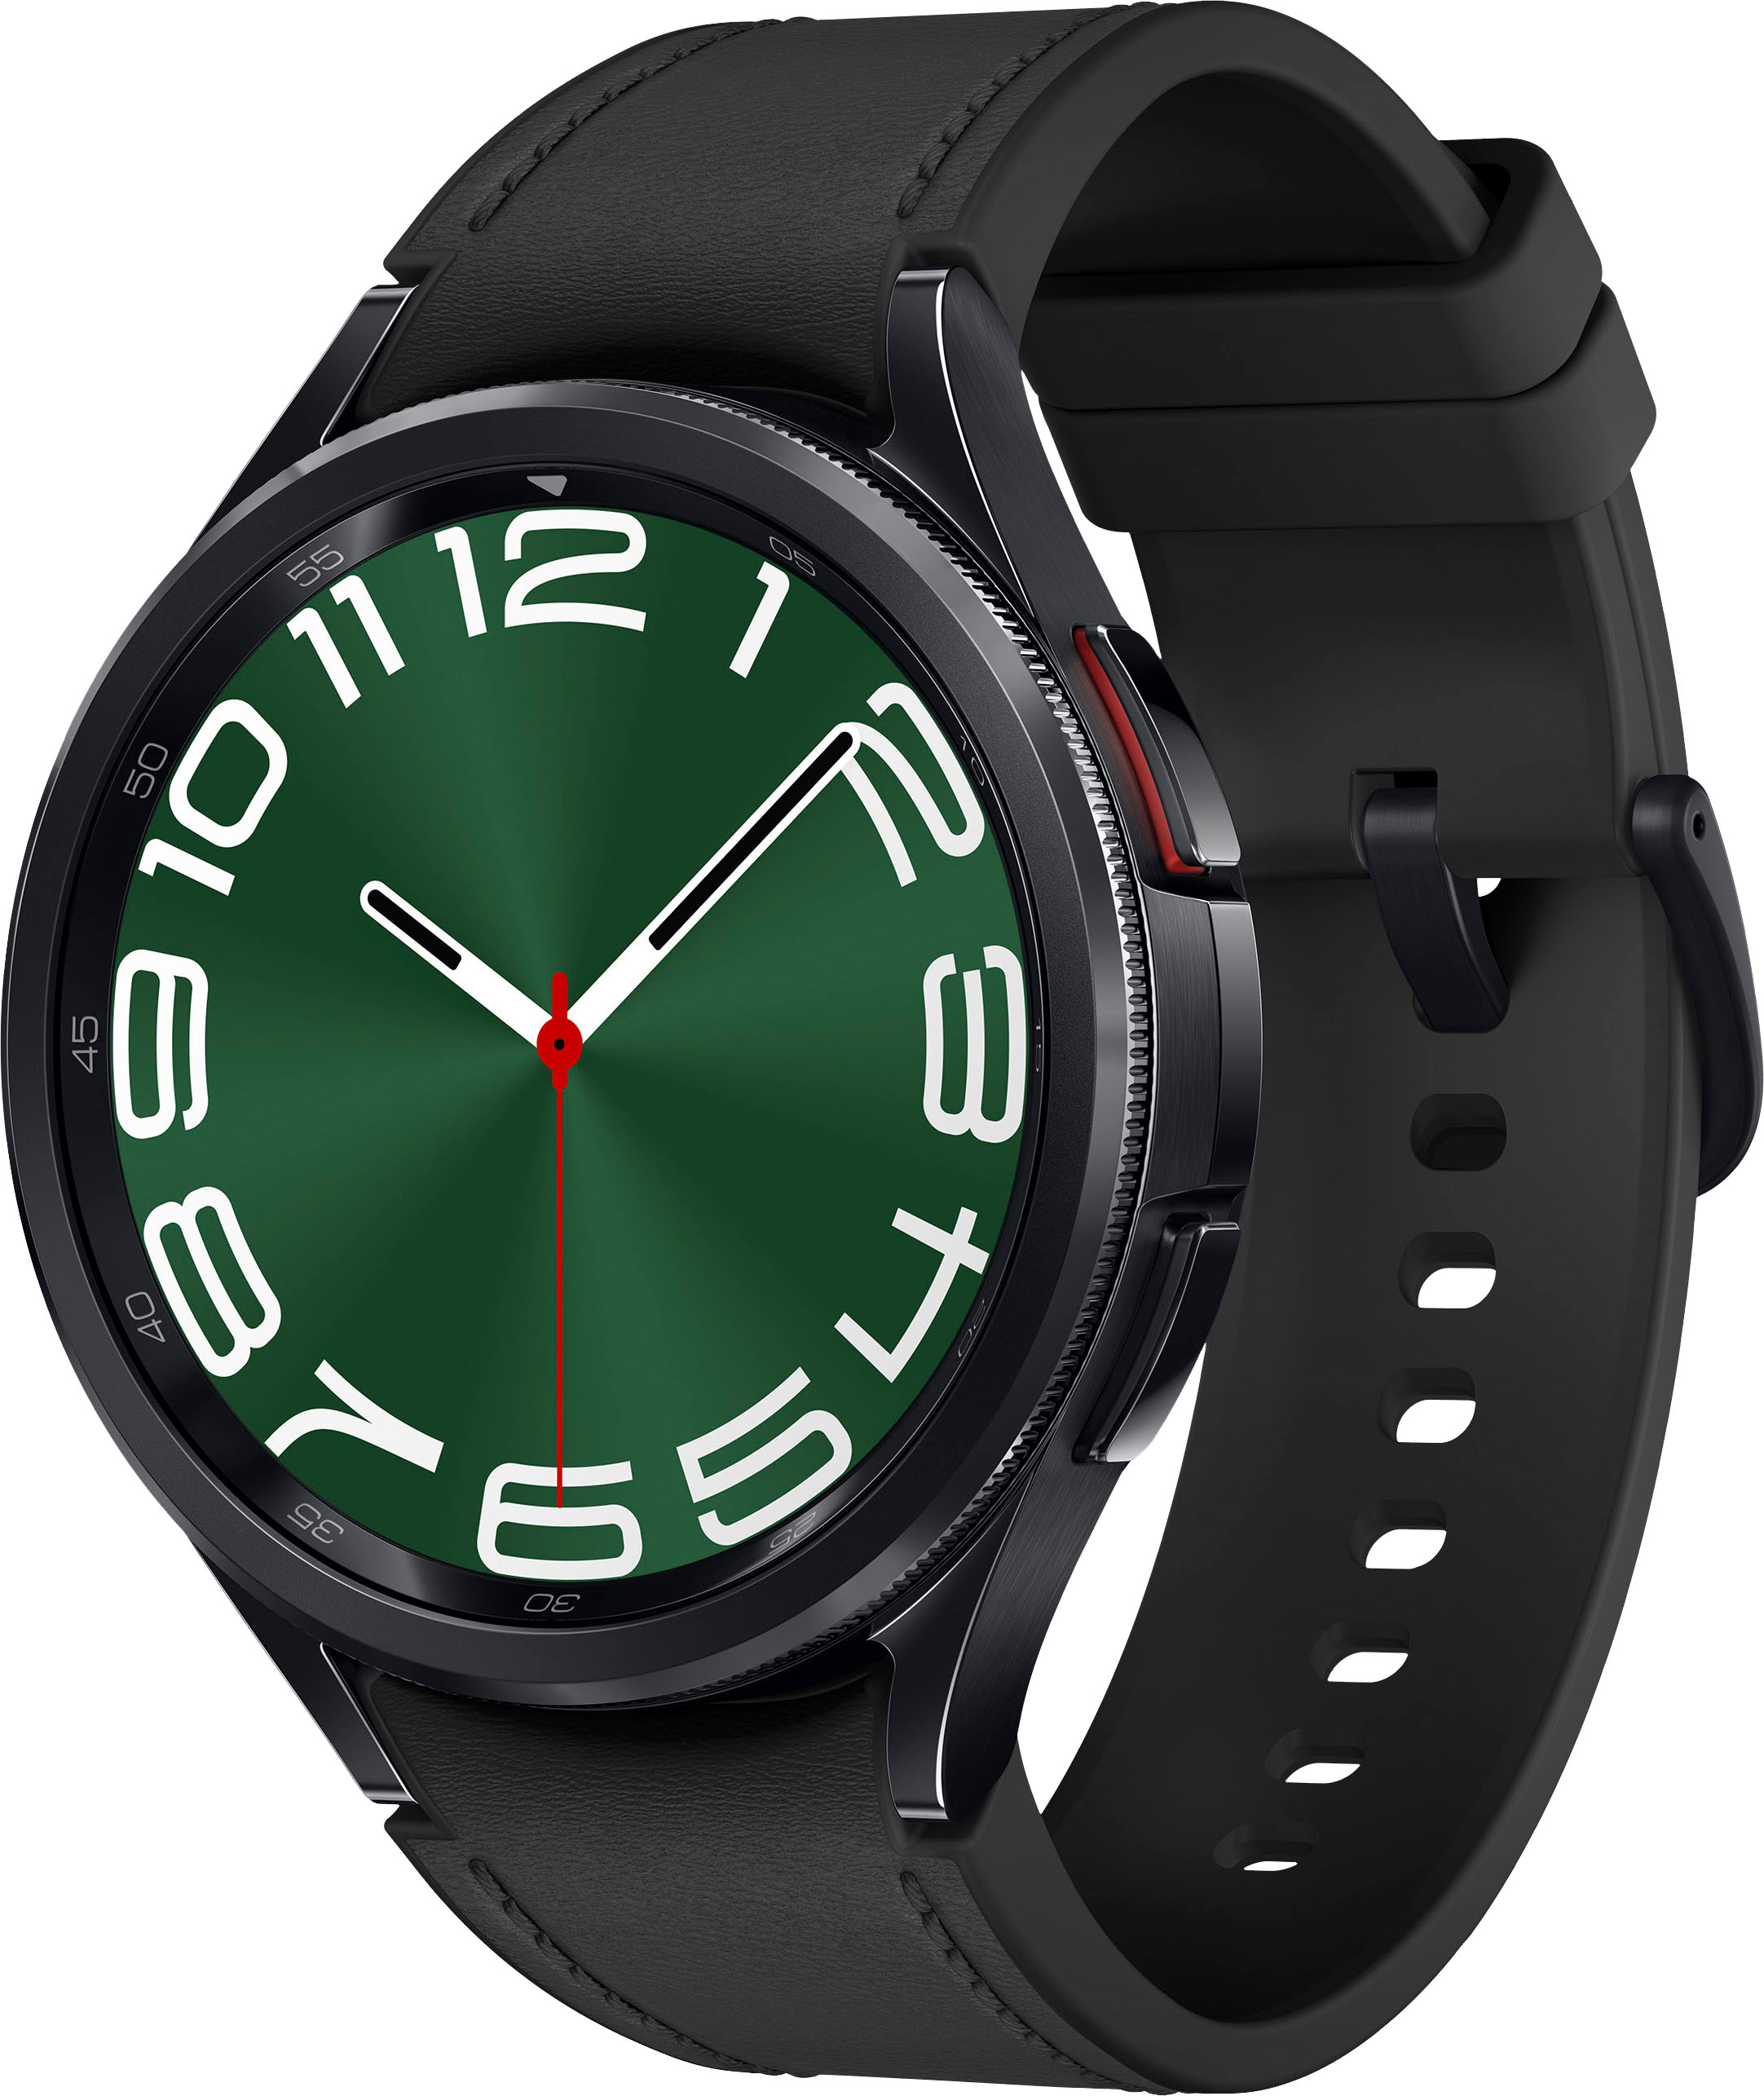 Huawei's Watch Ultra is a long-lasting rugged smartwatch that looks the part